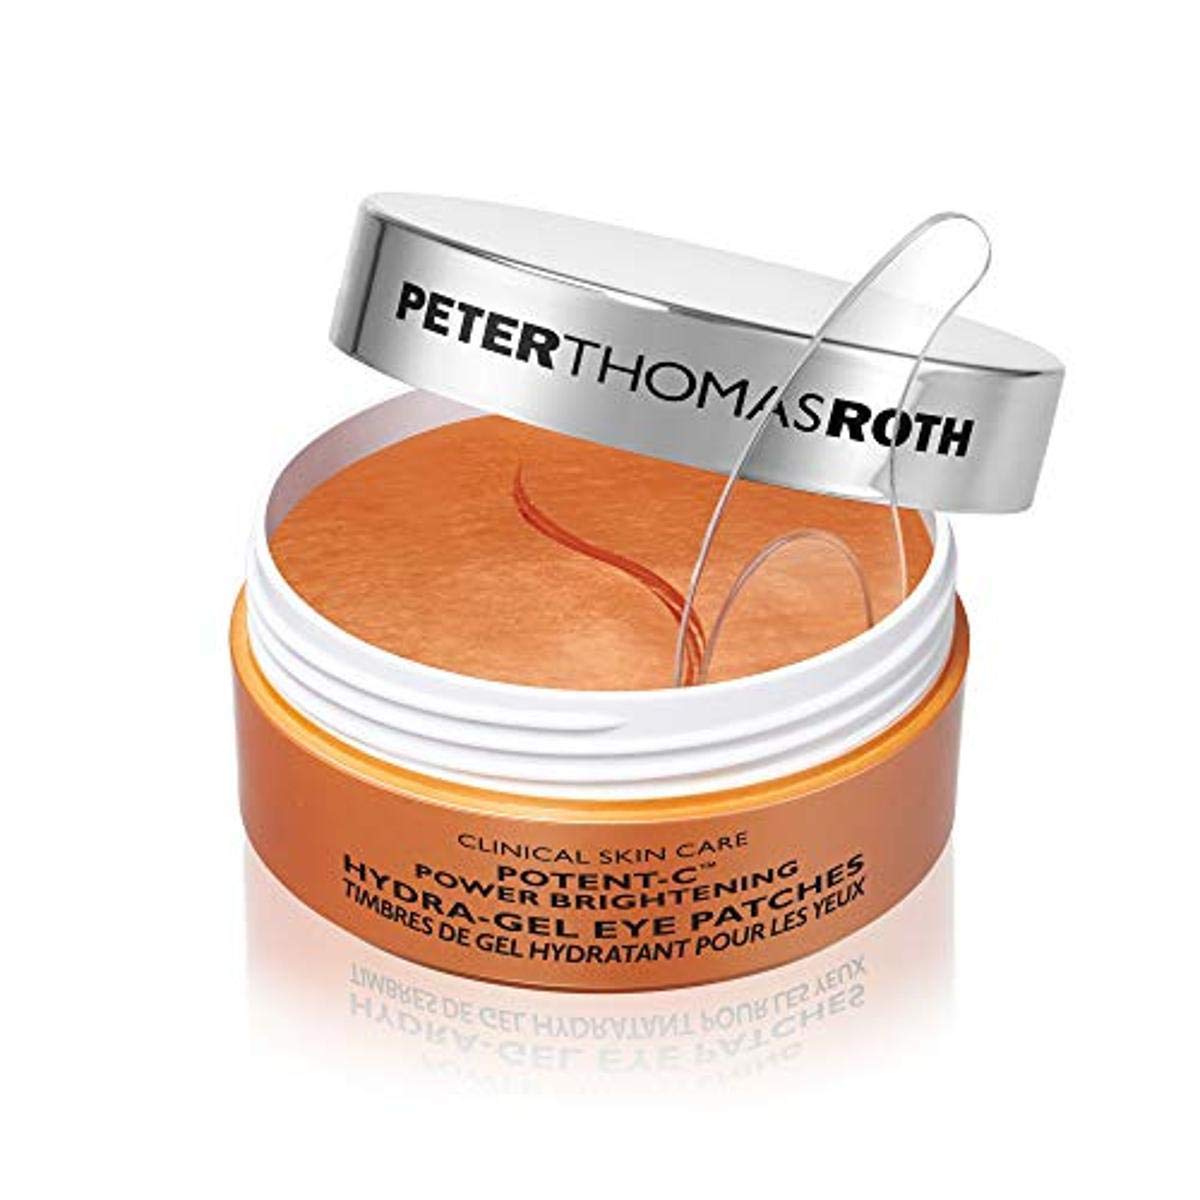 Peter Thomas Roth Potent-C Hydra-Gel Eye patches(60 pathces) NEW